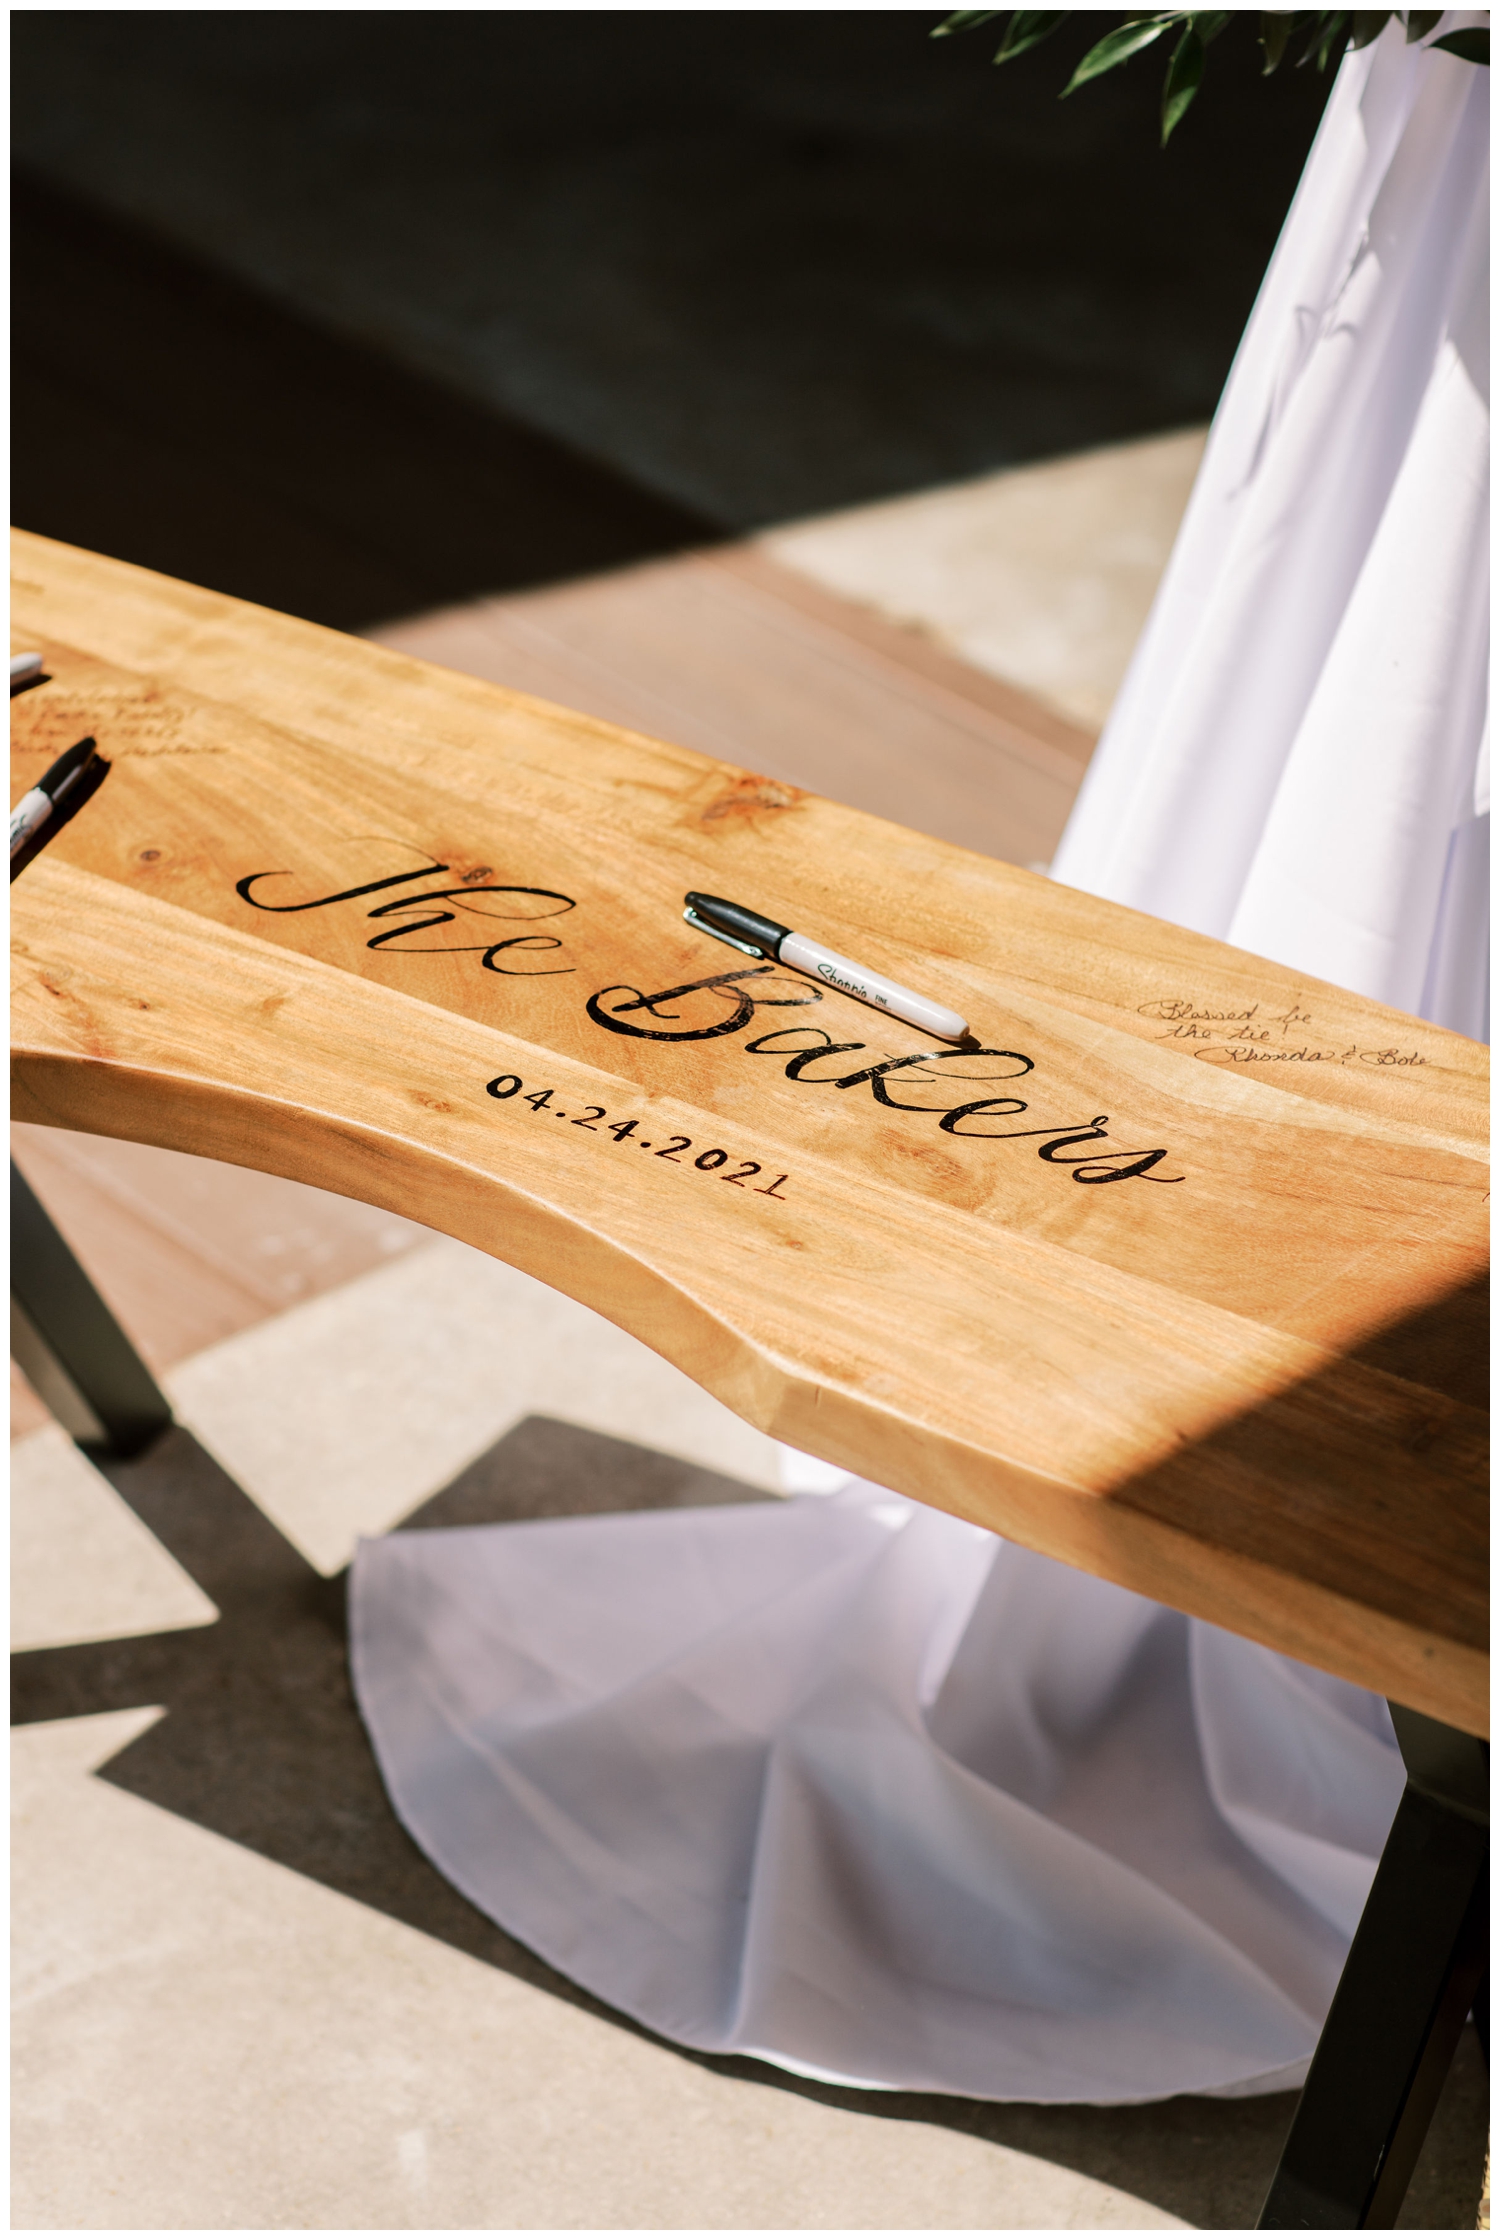 engraved bench for wedding guests to sign